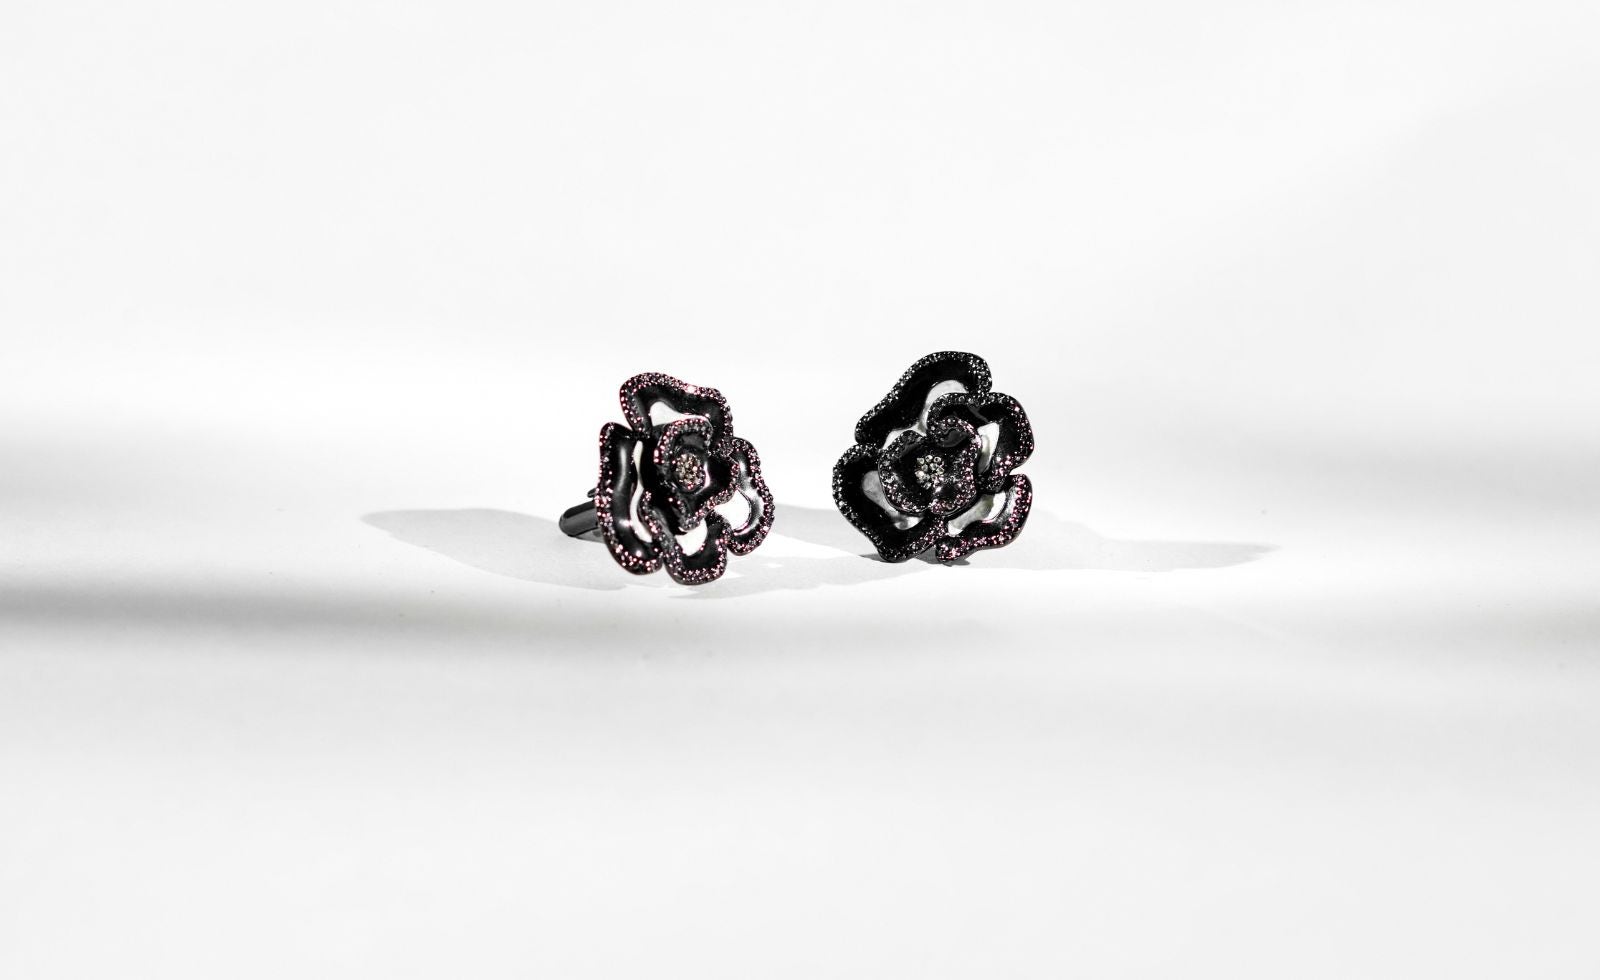 Discover the FINN Black and white enamel floral cufflinks with crystals from ANNE FONTAINE